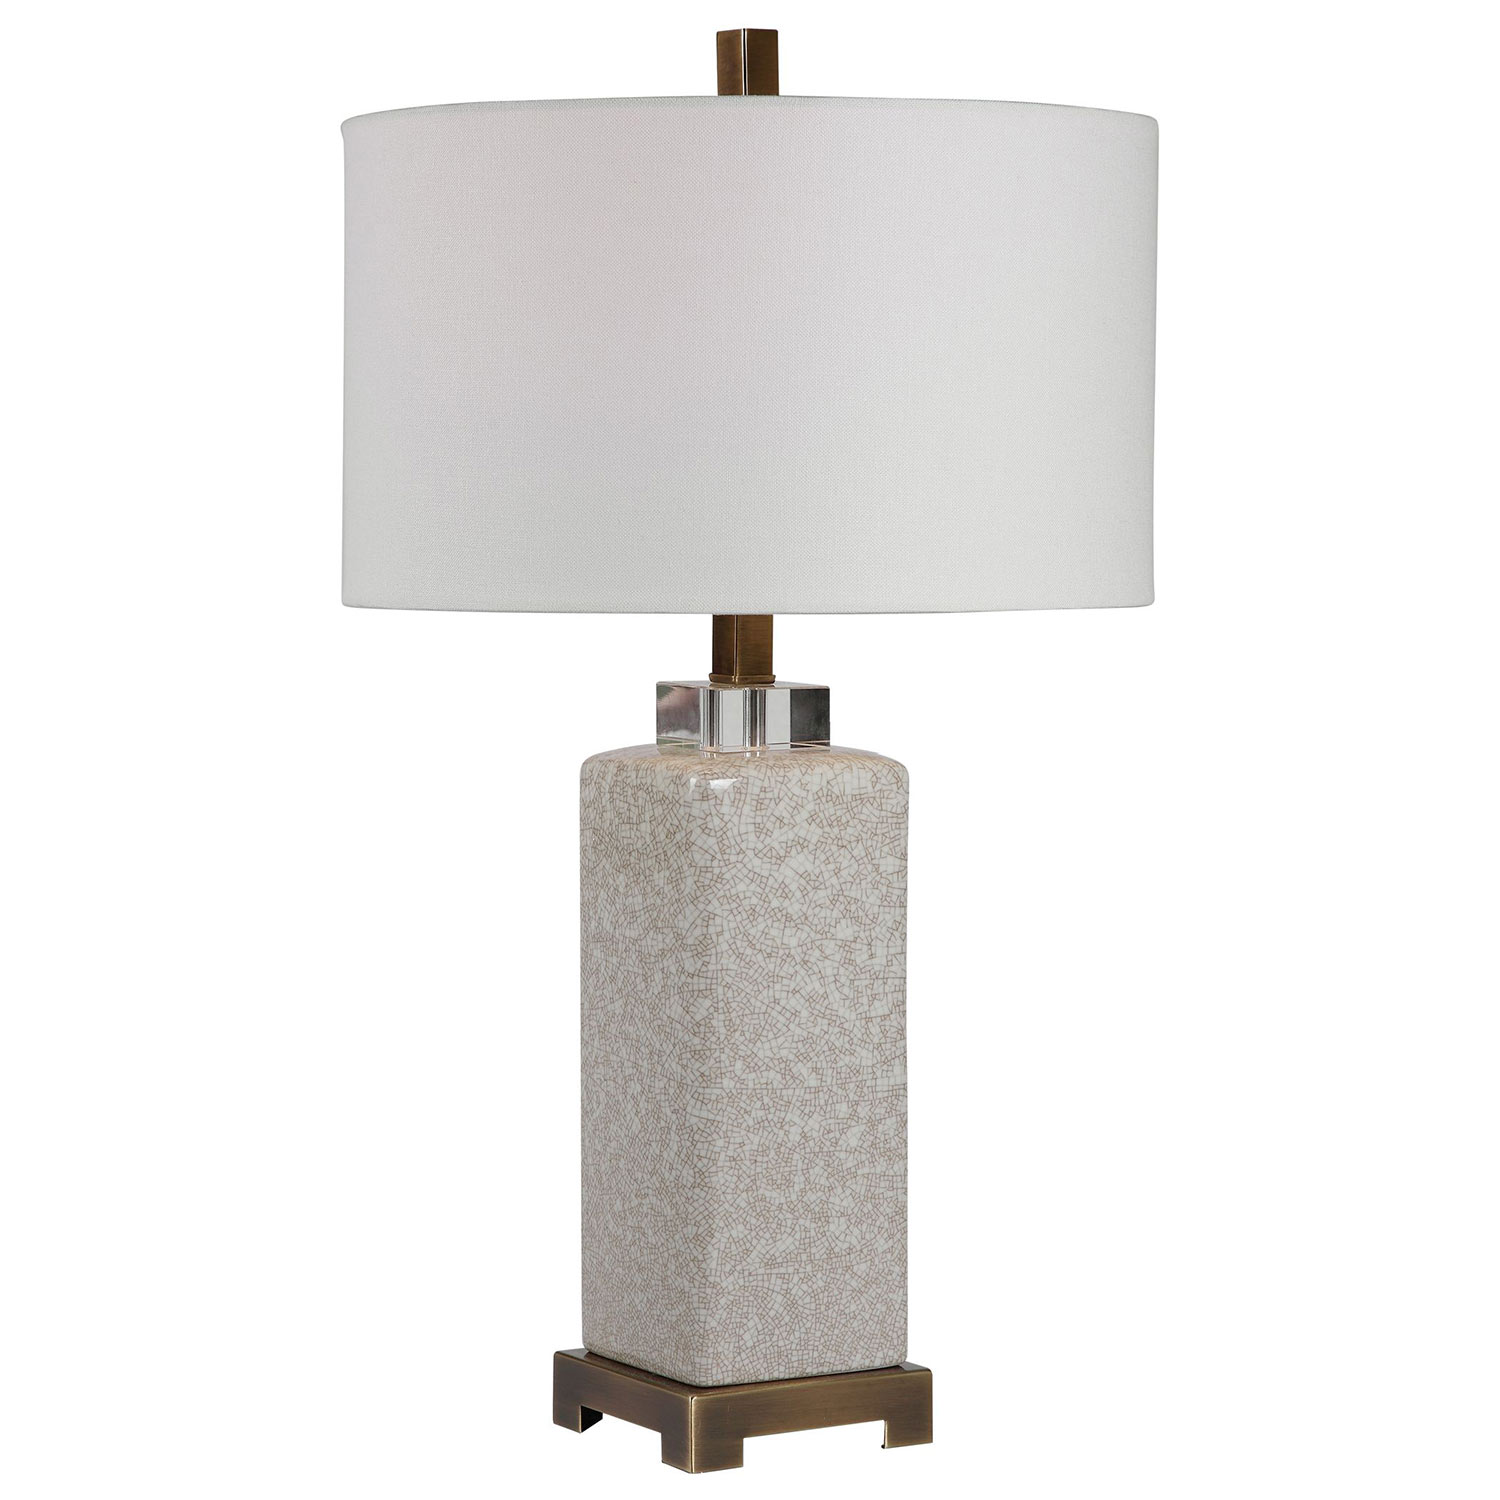 Uttermost Irie Crackled Table Lamp - Taupe